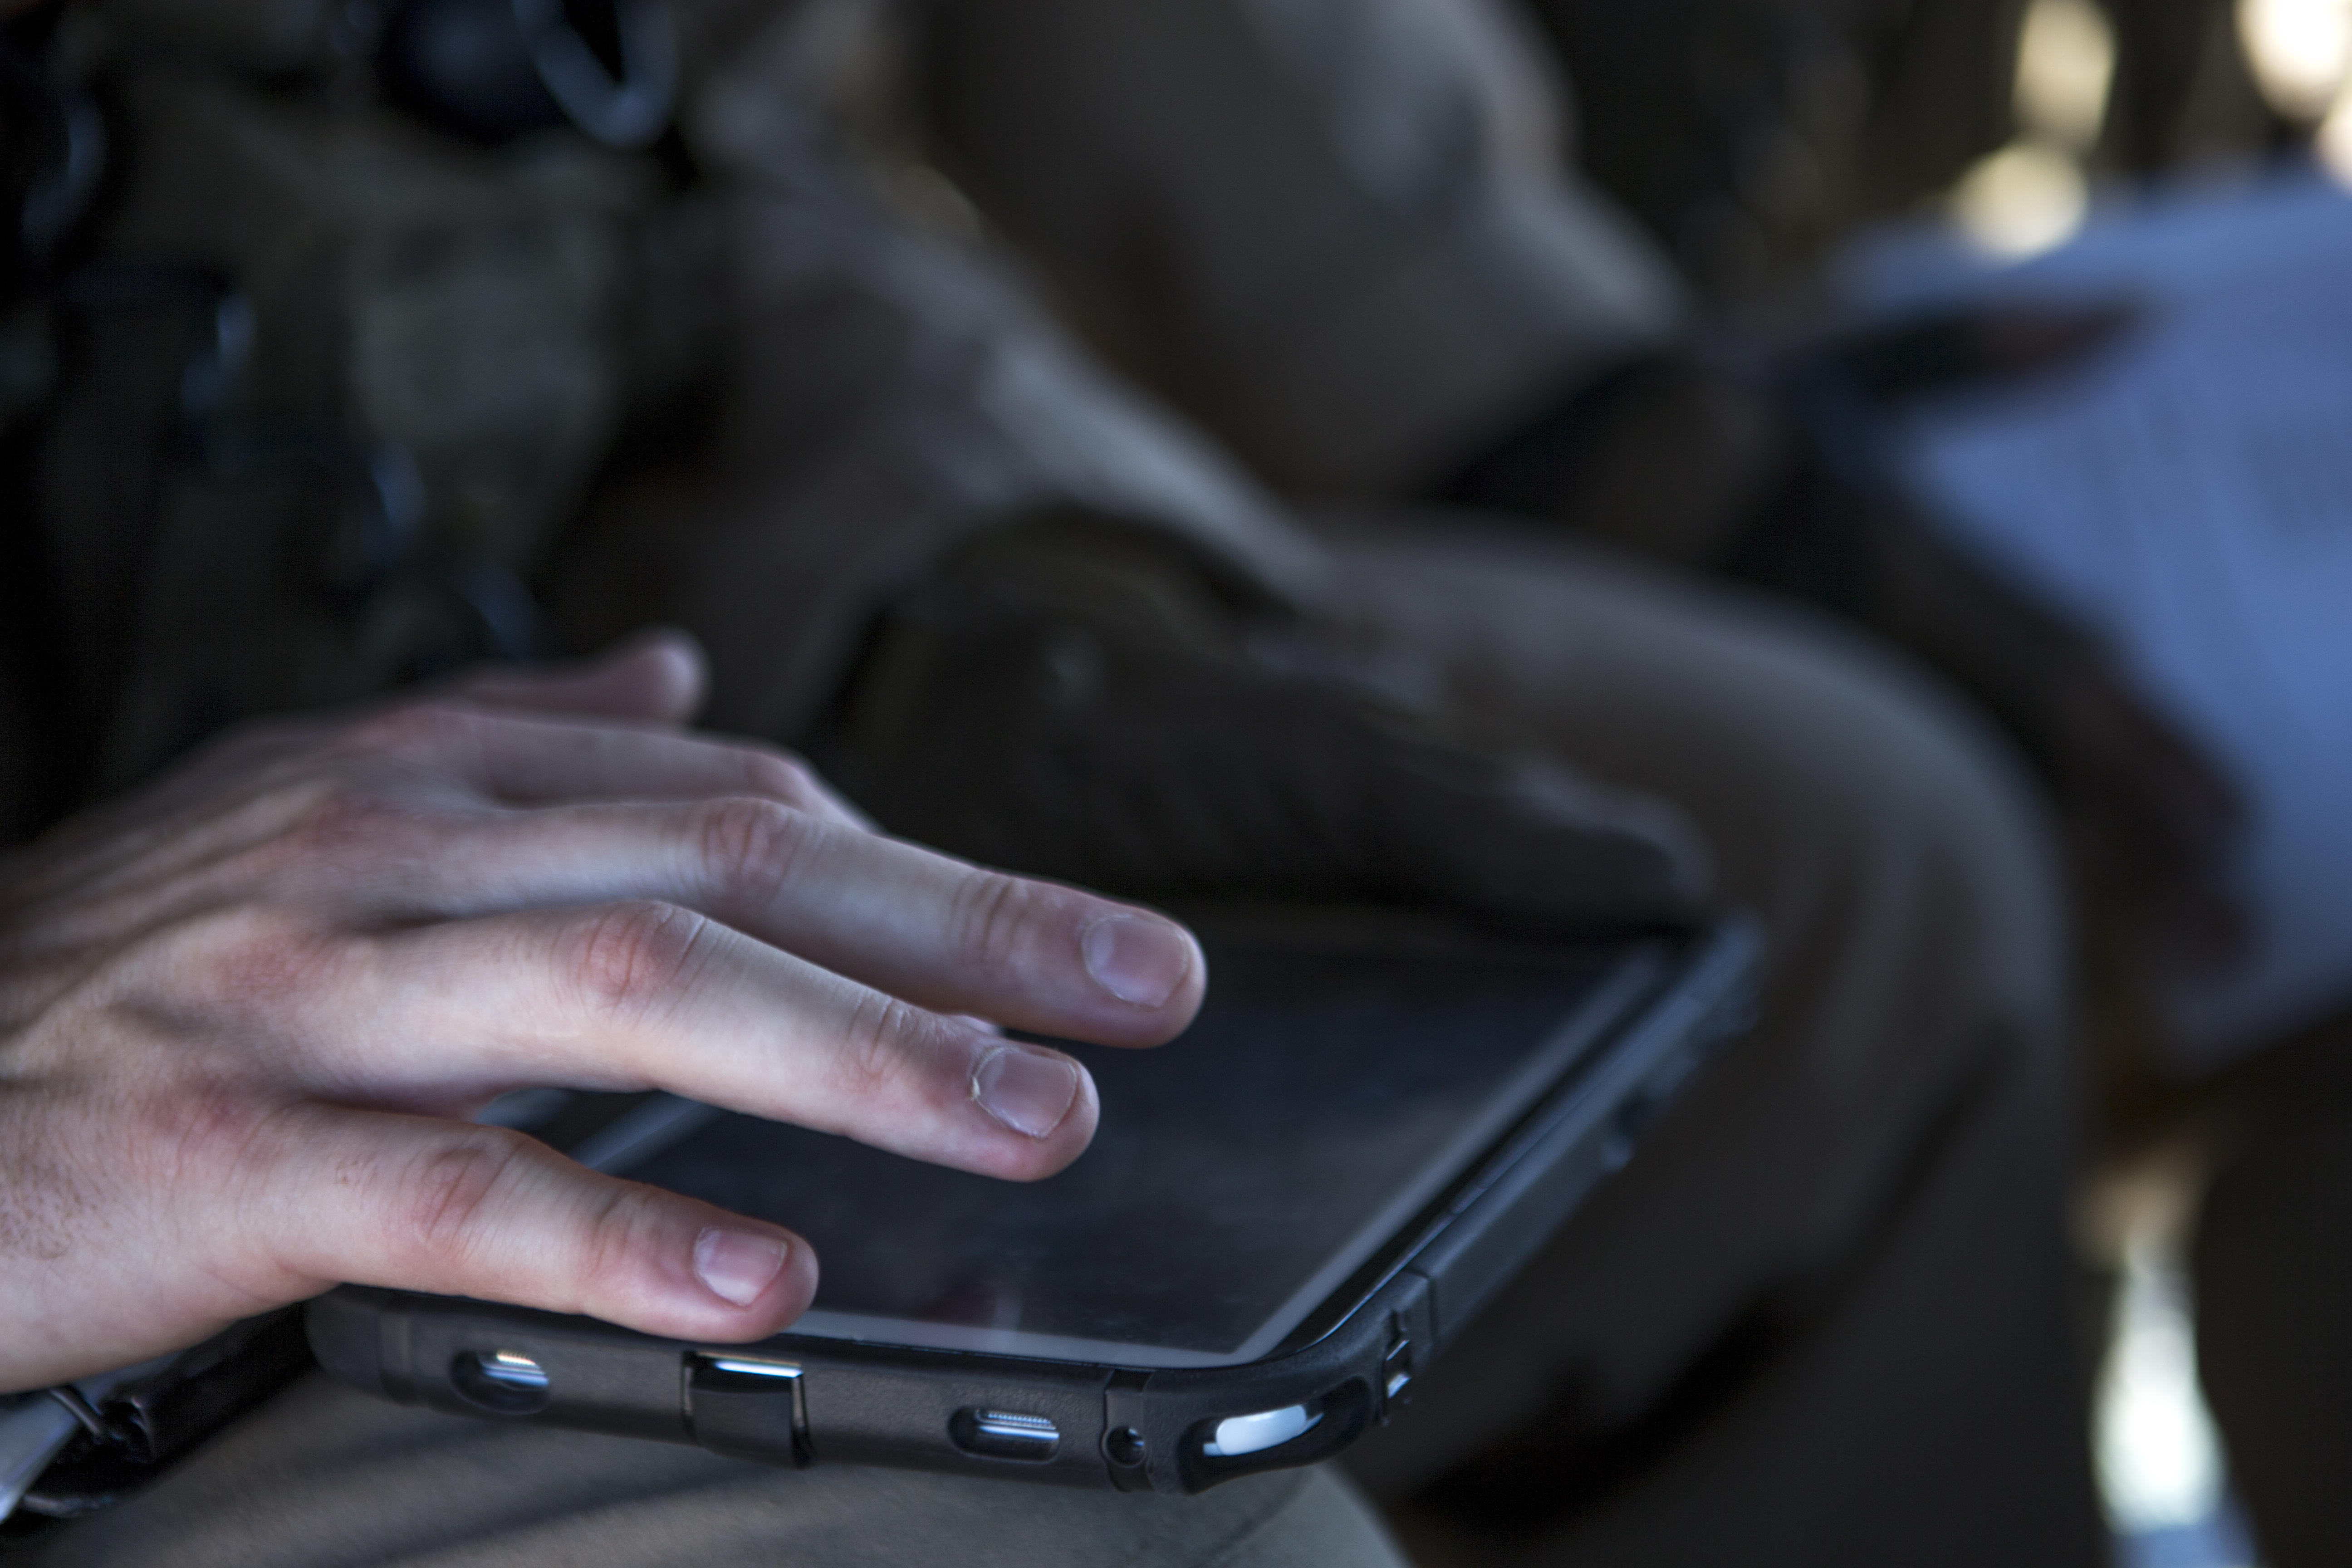 U.S. Marine Corps Cpl. Ty Morgan, a crew chief with Marine Light Attack Helicopter Squadron (HMLA) 269 uses a tablet to mark friendly and enemy targets during an urban close air support exercise in Yodaville, Ariz., Sept. 30, 2016. This exercise was part of Weapons Tactics Instructors course (WTI) 1-17, a seven week event hosted by MAWTS-1 cadre which emphasizes operational integration of the six functions of Marine Corps aviation in support of a Marine Air Ground Task Force. MAWTS-1 provides standardized advanced tactical training and certification of unit instructor qualifications to support Marine aviation Training and Readiness and assists in developing and employing aviation weapons and tactics (U.S. Marine Corps photo by Lance Cpl. Andrew Huff, MAWTS-1 COMCAM)